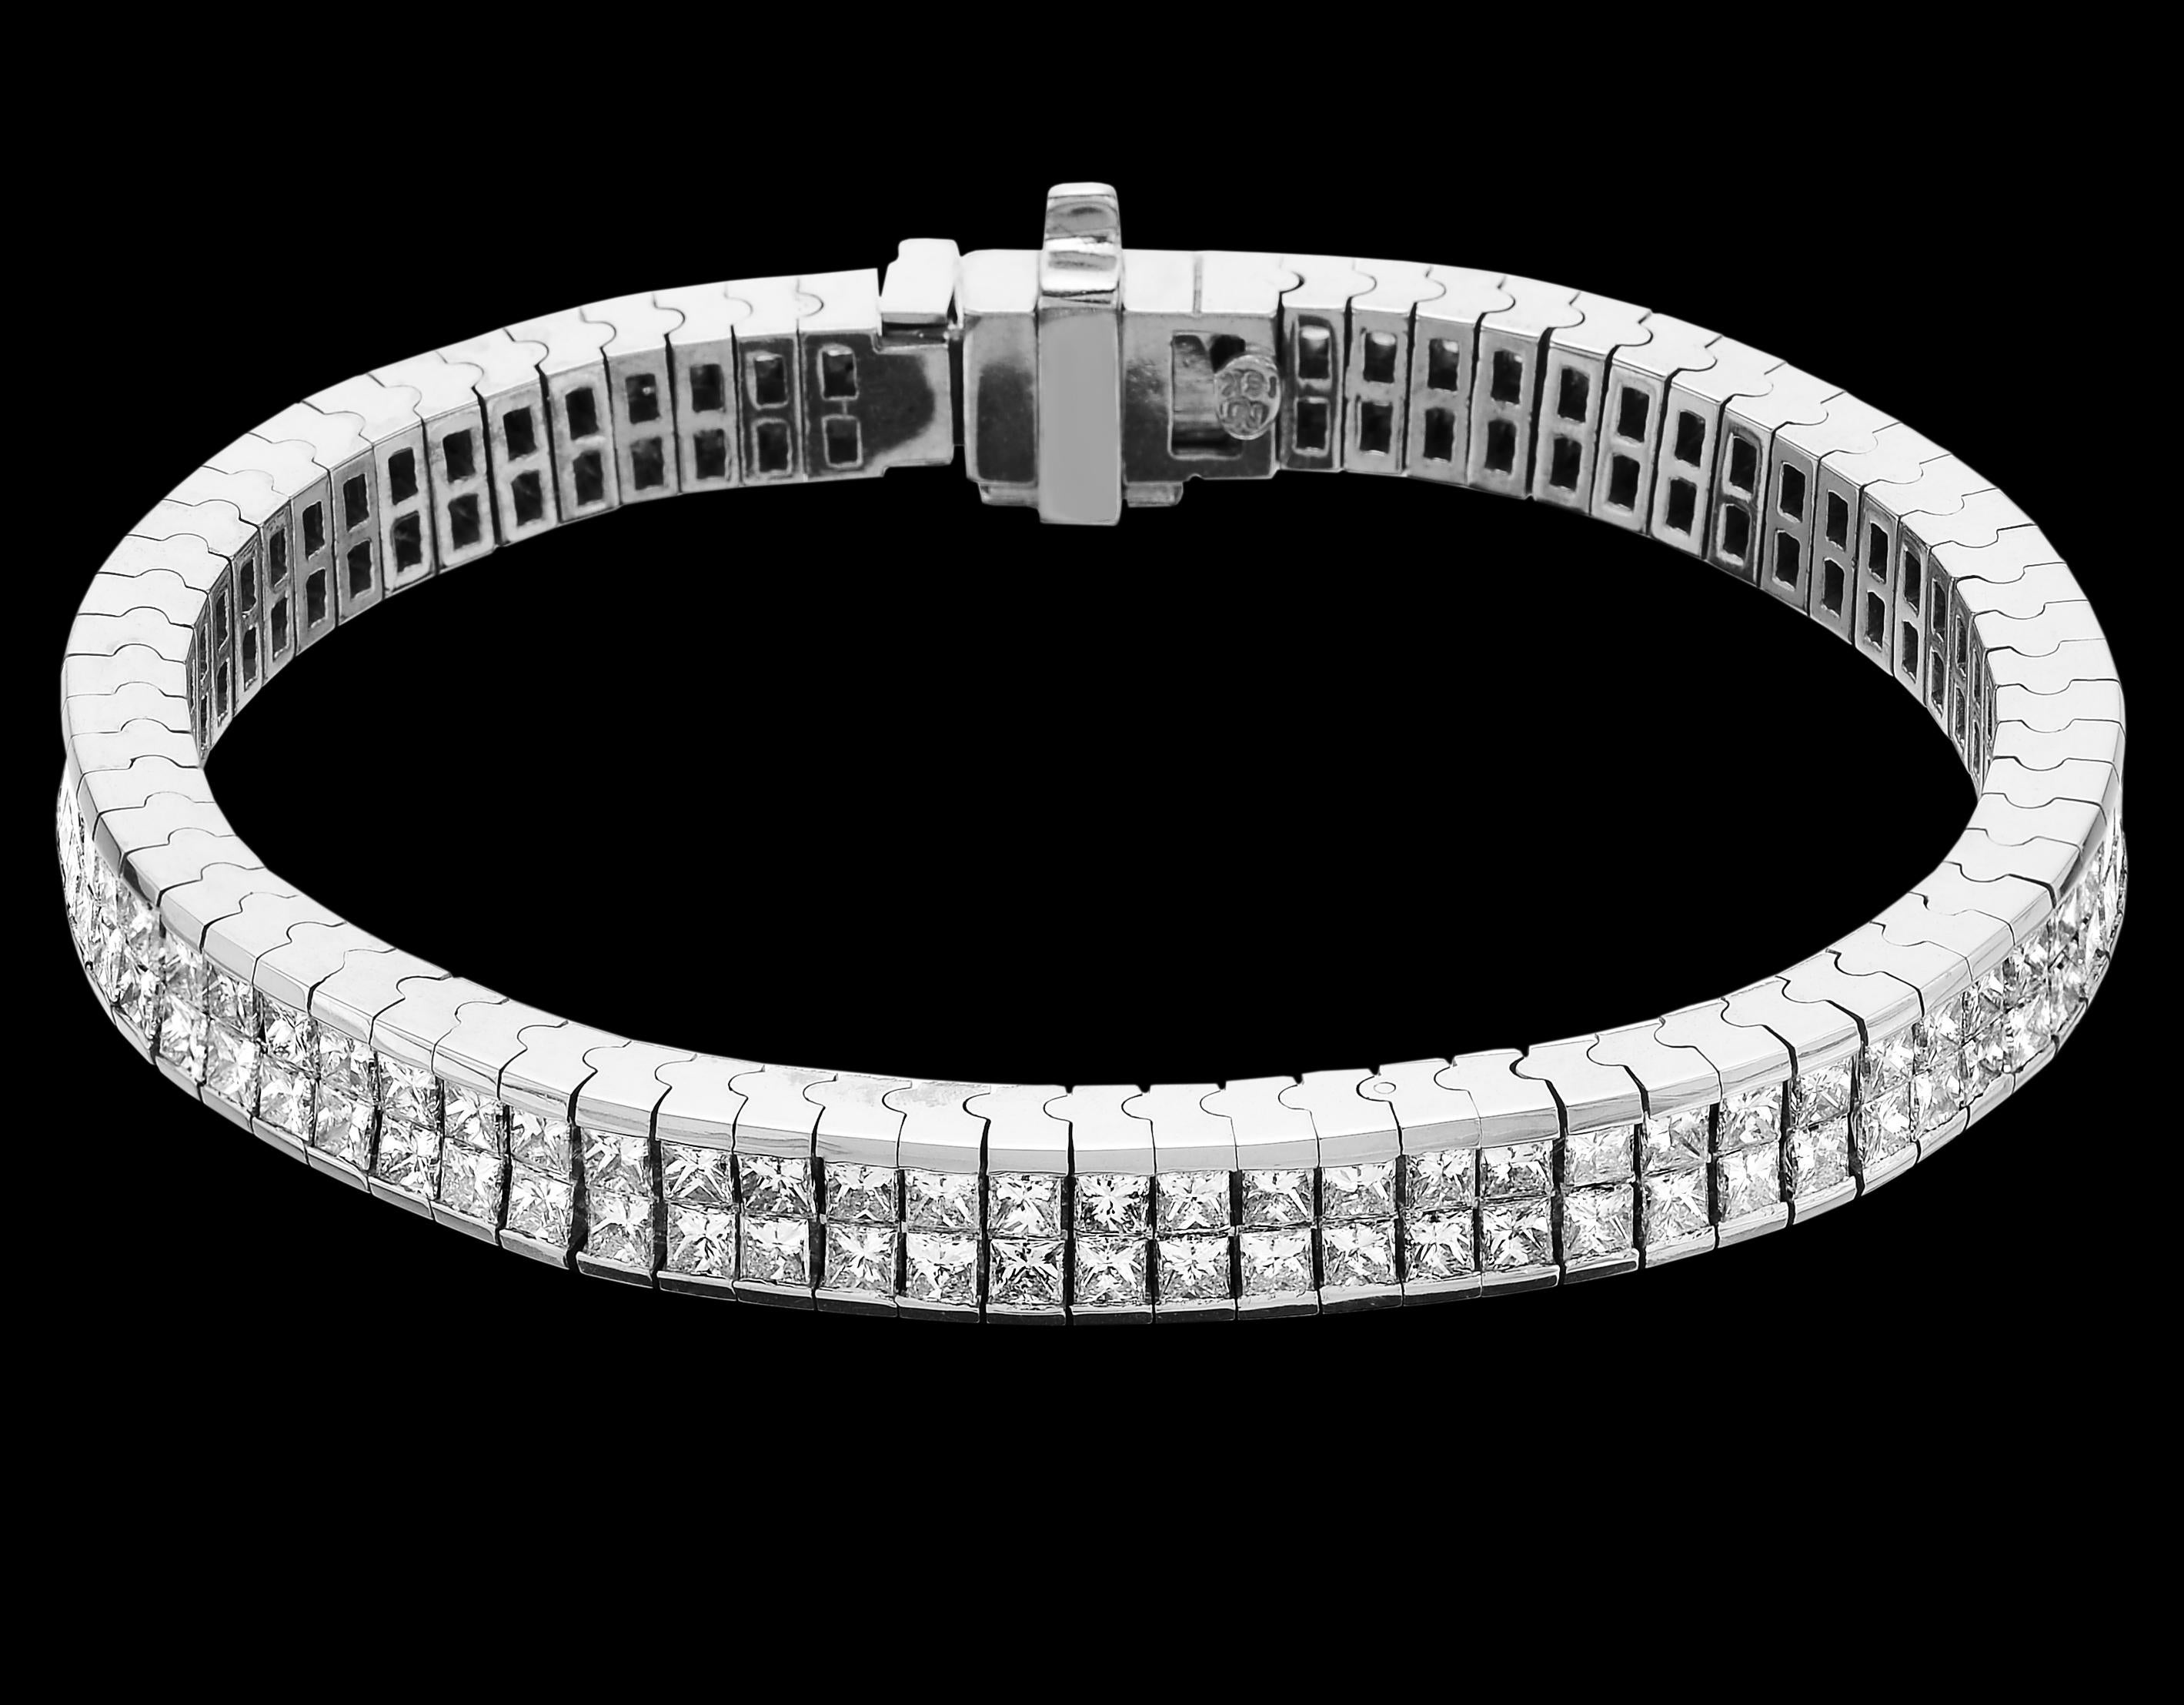 Princess Cut Diamond Invisible Setting Flexible Bracelet in 18 ct White Gold
An infinite mechanical thread of tightly compacted invisible setting links is a perfect on any skin colour. This is an 18 ct white gold bracelet fully devoured in gorgeous